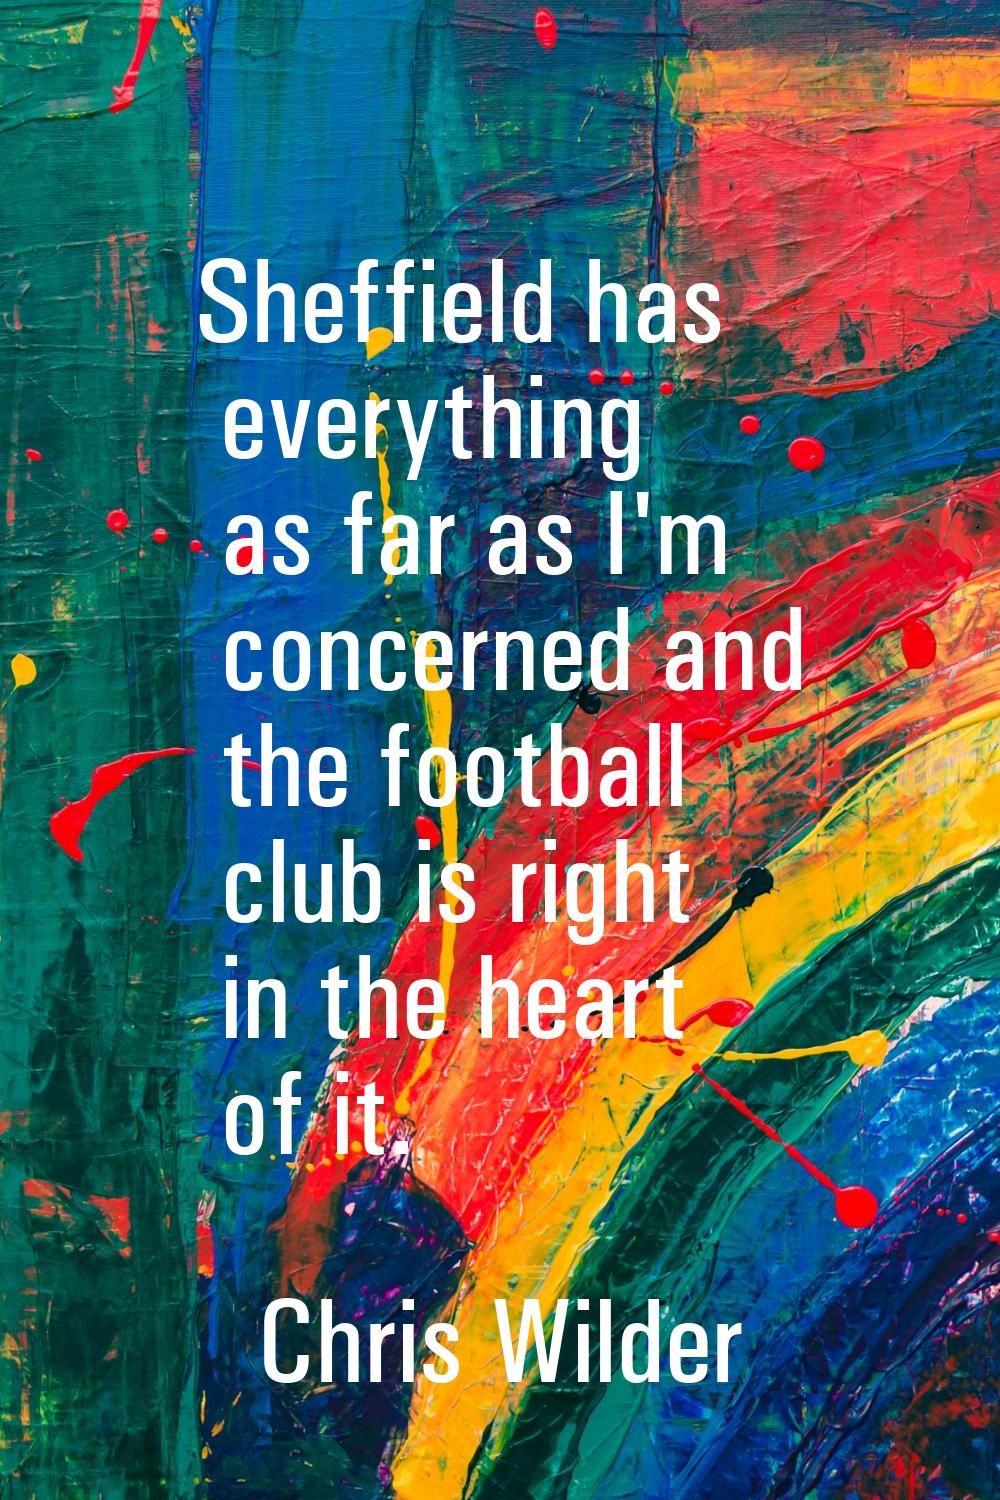 Sheffield has everything as far as I'm concerned and the football club is right in the heart of it.